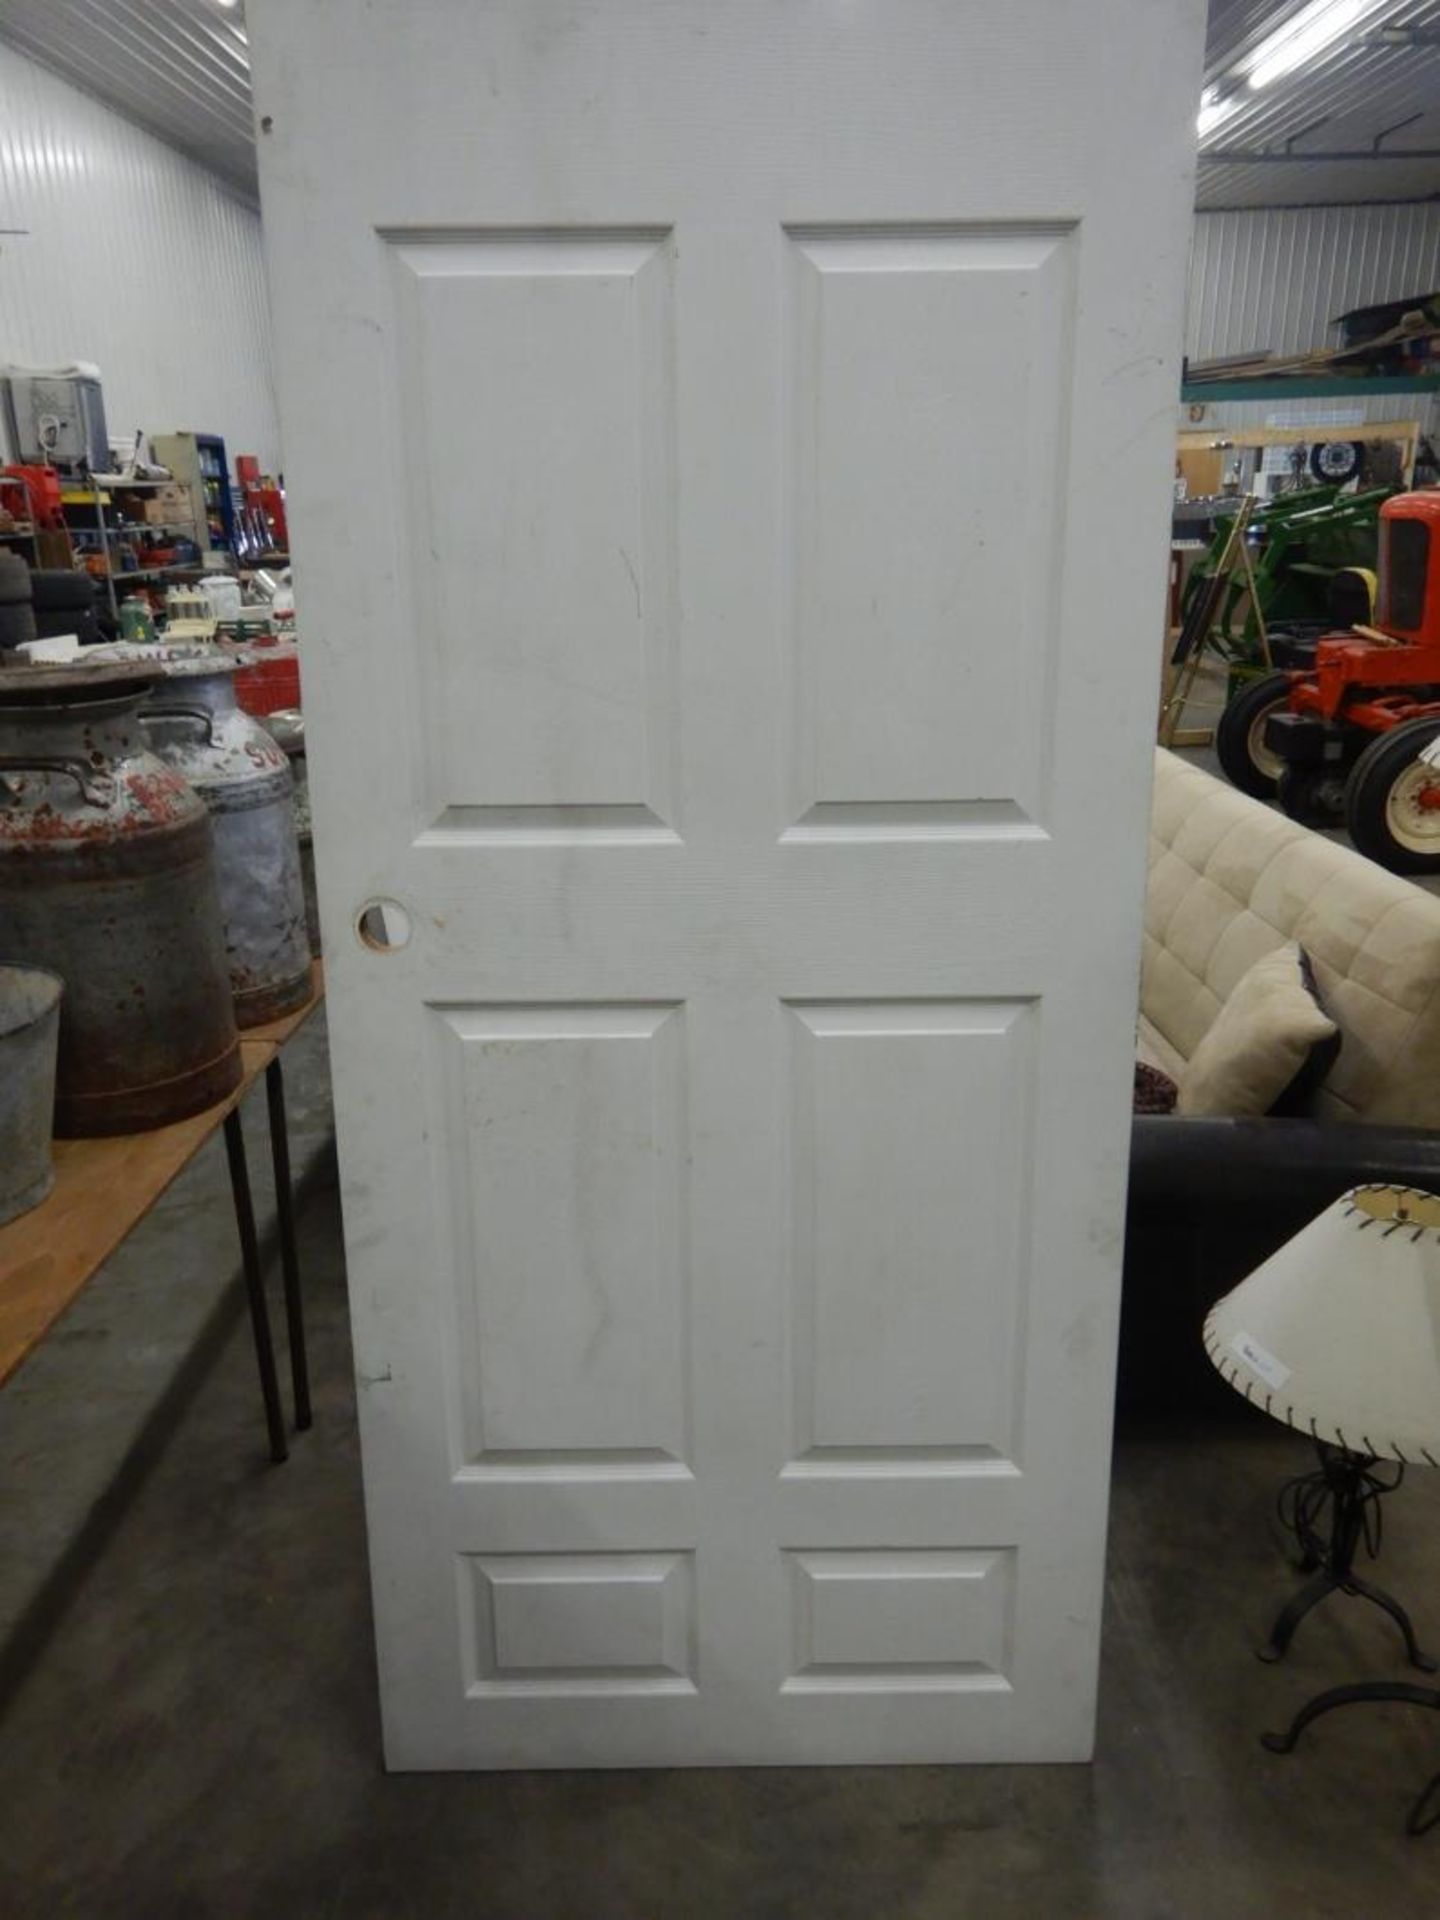 PREVIOUSLY INSTALLED 36" X 80 INTERIOR DOOR W/ HINGES